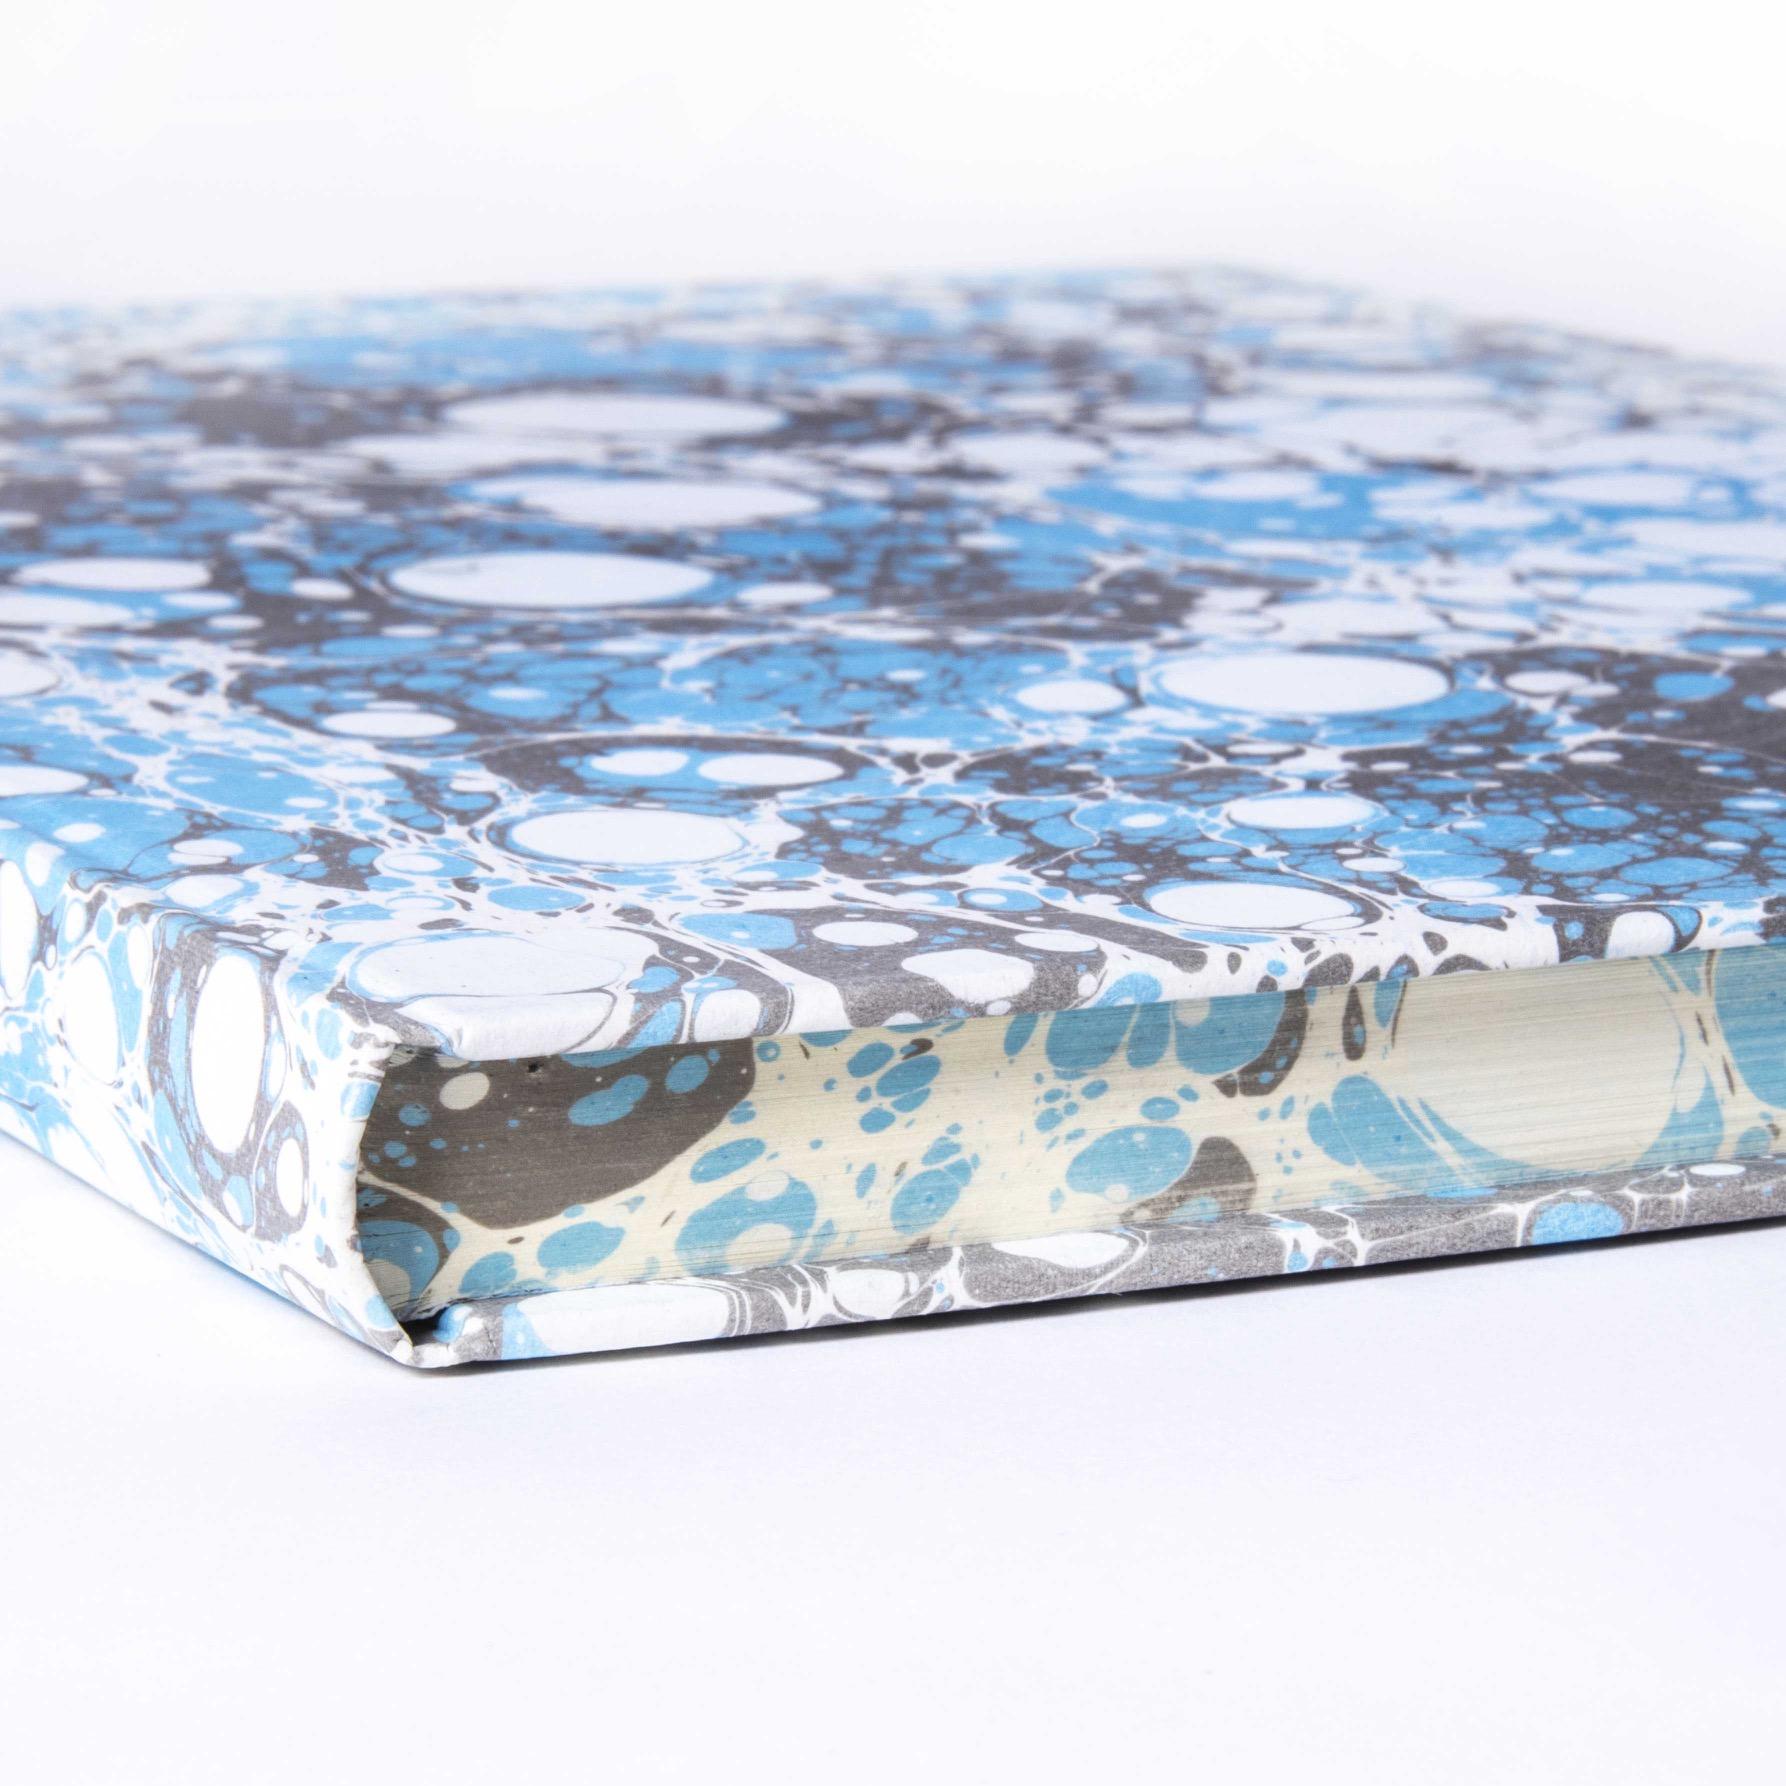 Hand Marbled Italian A4 Note Book
Hand Marbled Italian A4 Note Book. Hand made in a paper mill in Italy, luxurious A4 notebooks with plain unlined heavy weight paper. Each notebook is unique in colour and design. Handmade for Merchant &